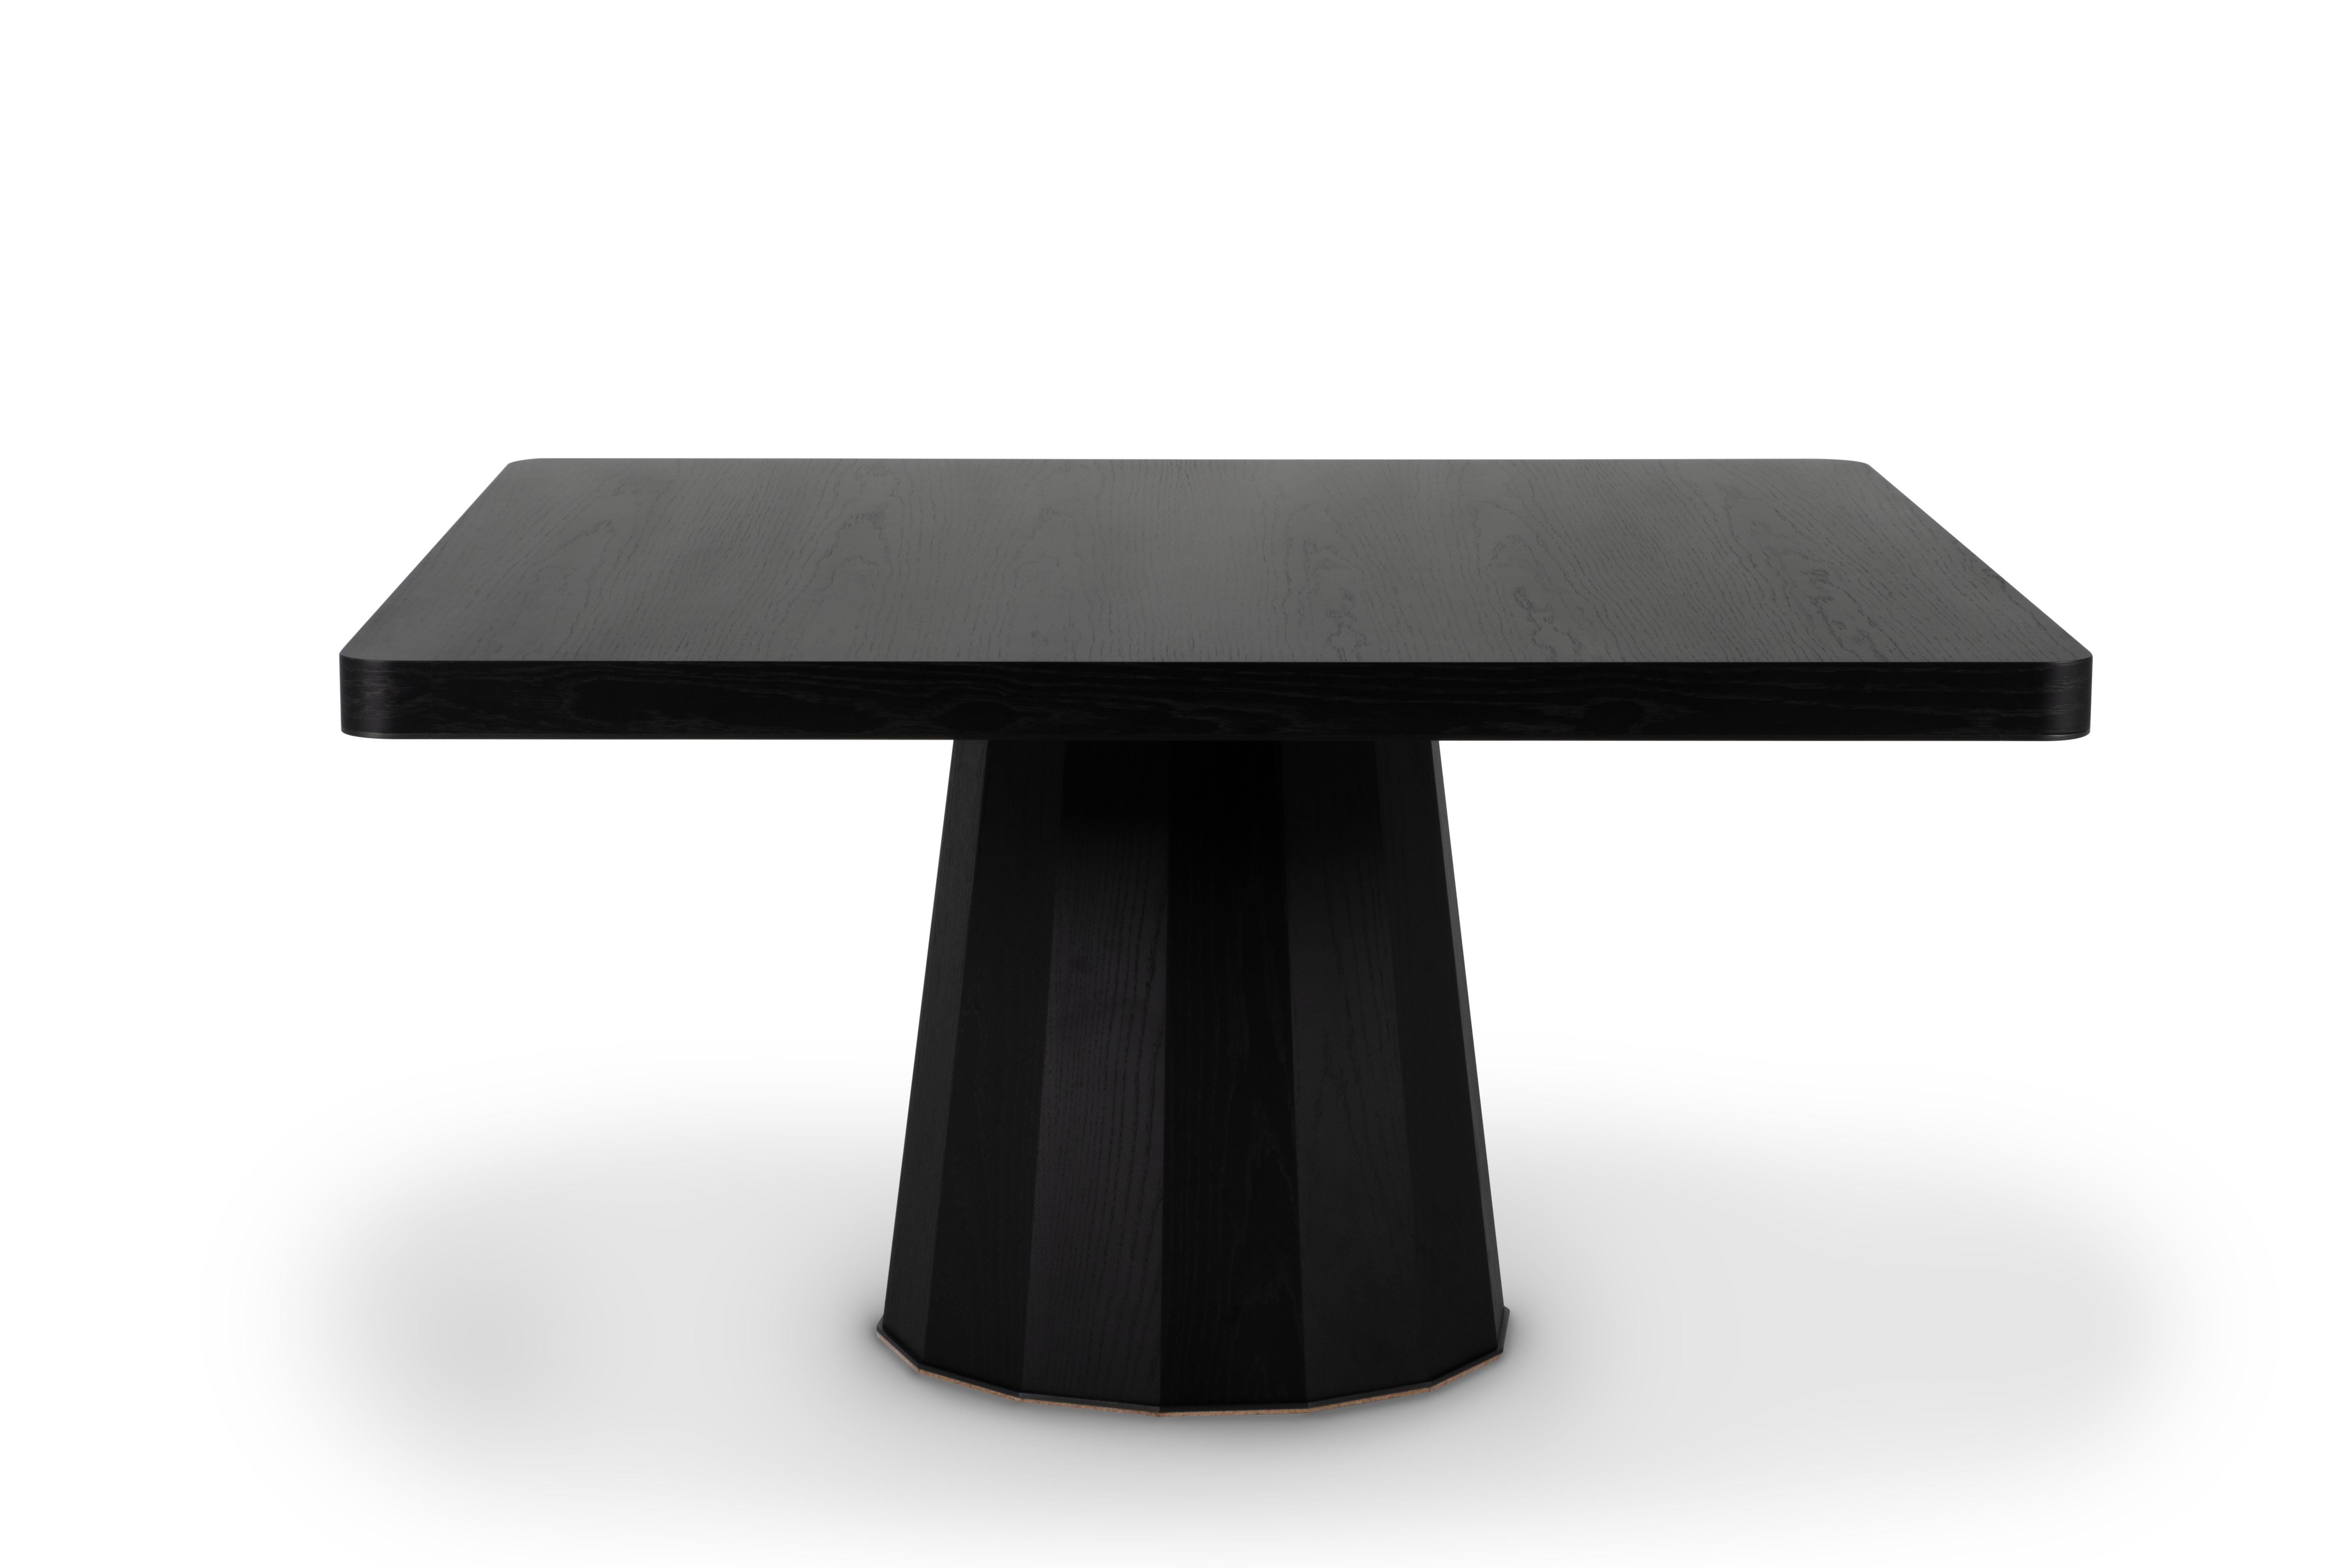 Howlite Dining Table 8-Seats, Modern Collection, Handcrafted in Portugal - Europe by GF Modern.

Howlite black dining table represents the dawn of a new modern era. The black oxidized brass detail on the table top complements the bold and